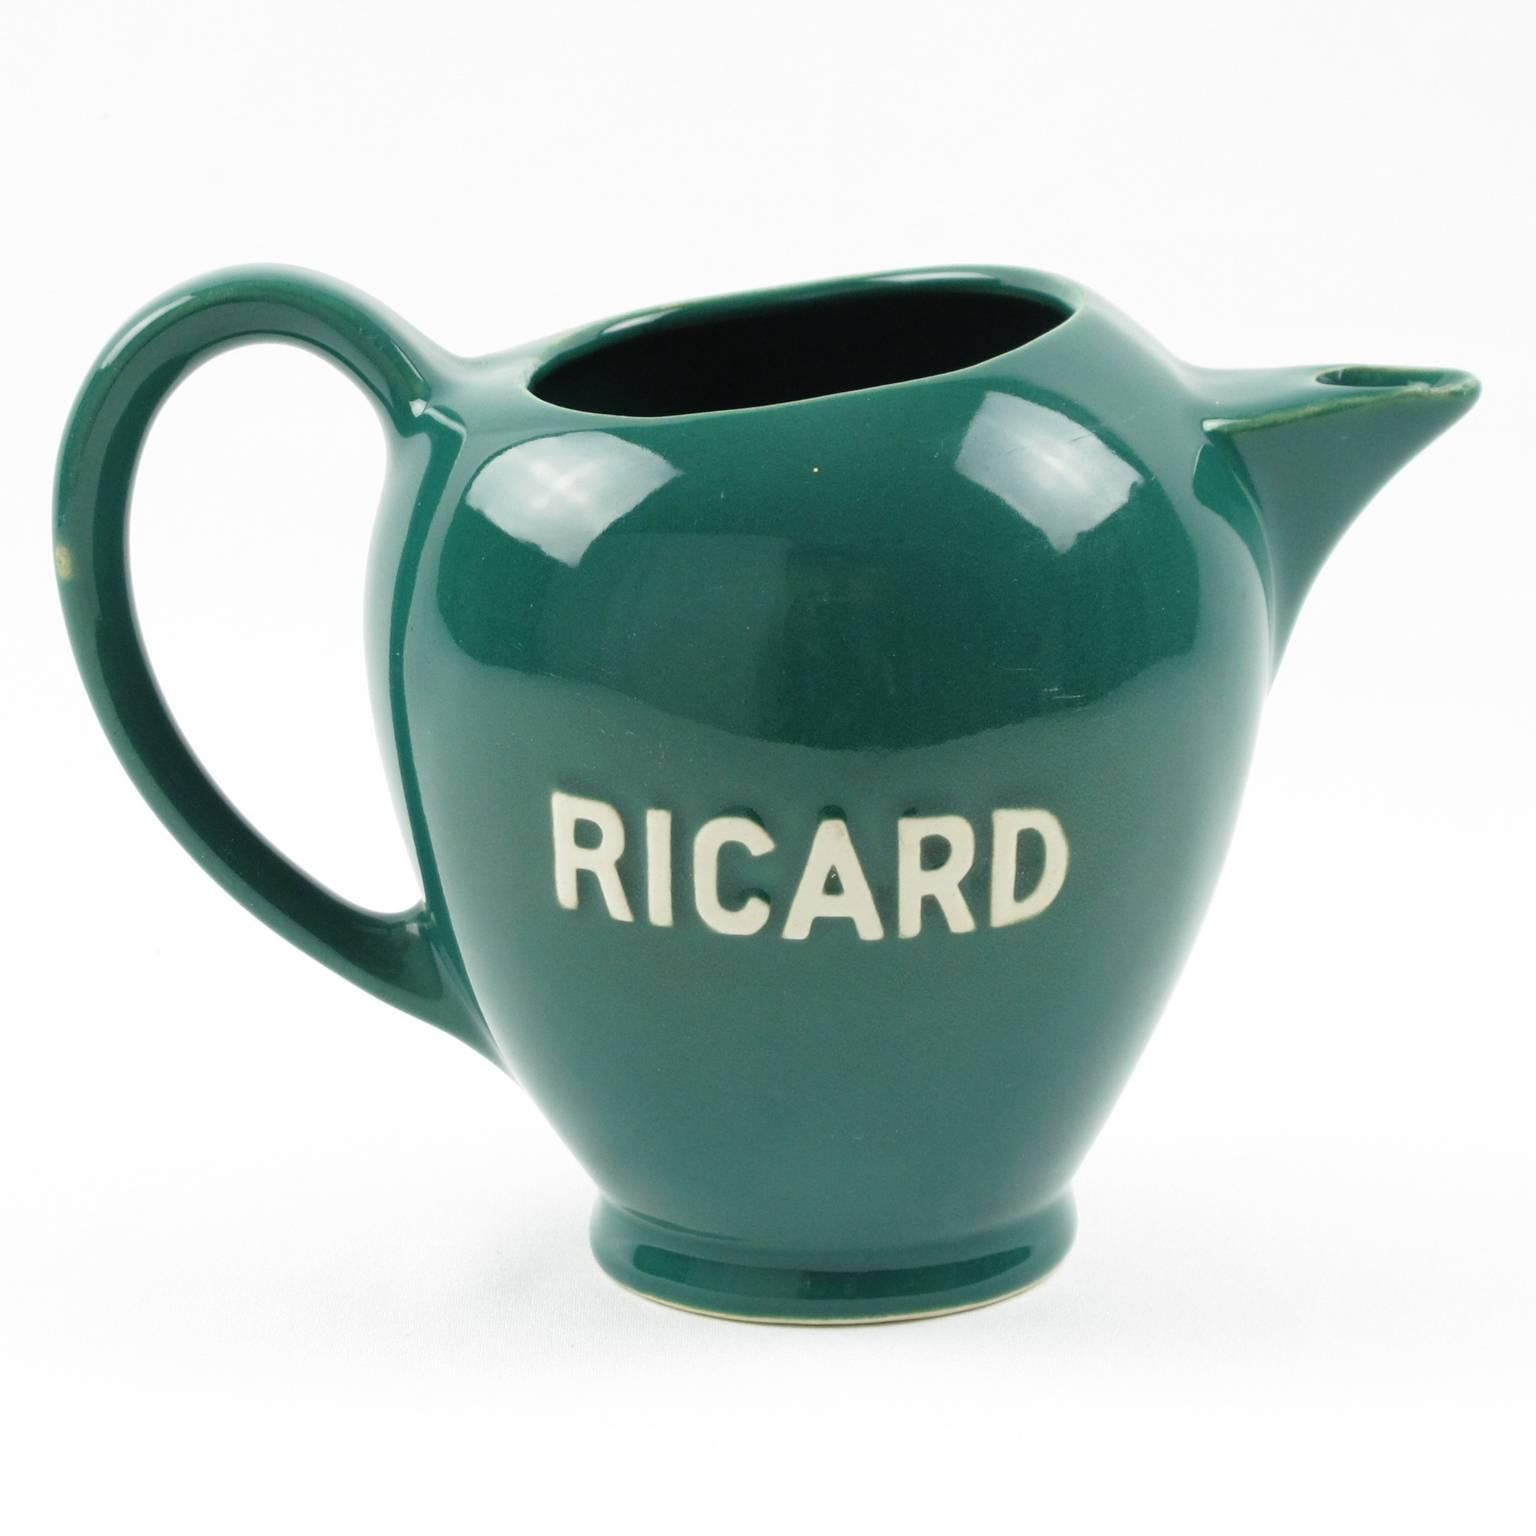 Iconic French cafe barware accessory. Set of four original Ricard water pitcher, pot, jug in glazed earthenware with embossed marking on both side. Assorted colors of teal, yellow, off-white and brown. These pitchers are beautiful 1950s and 1960s